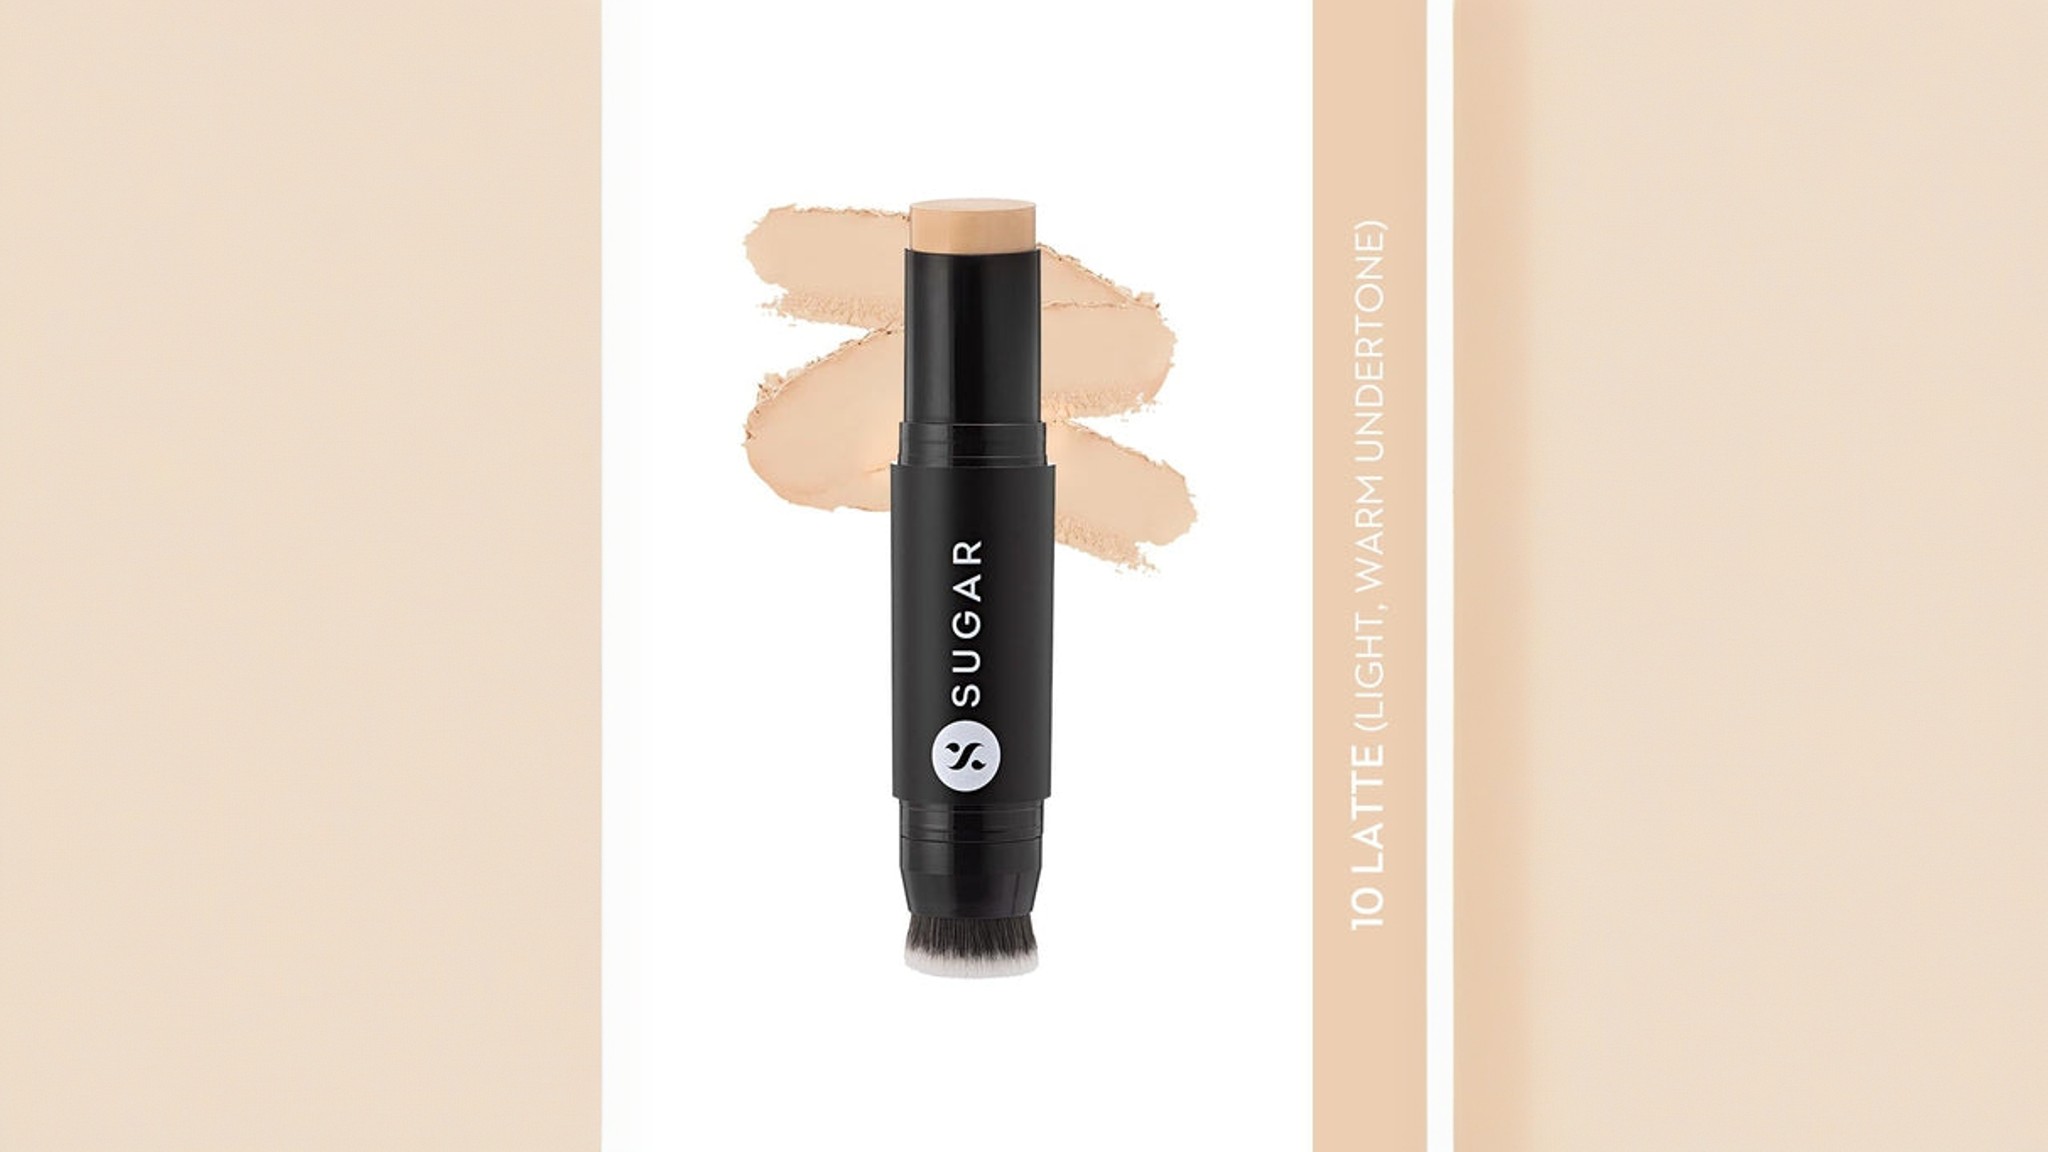 You are currently viewing Sugar Foundation Price: The Ace Of Face Foundation Stick Mini Unveiled